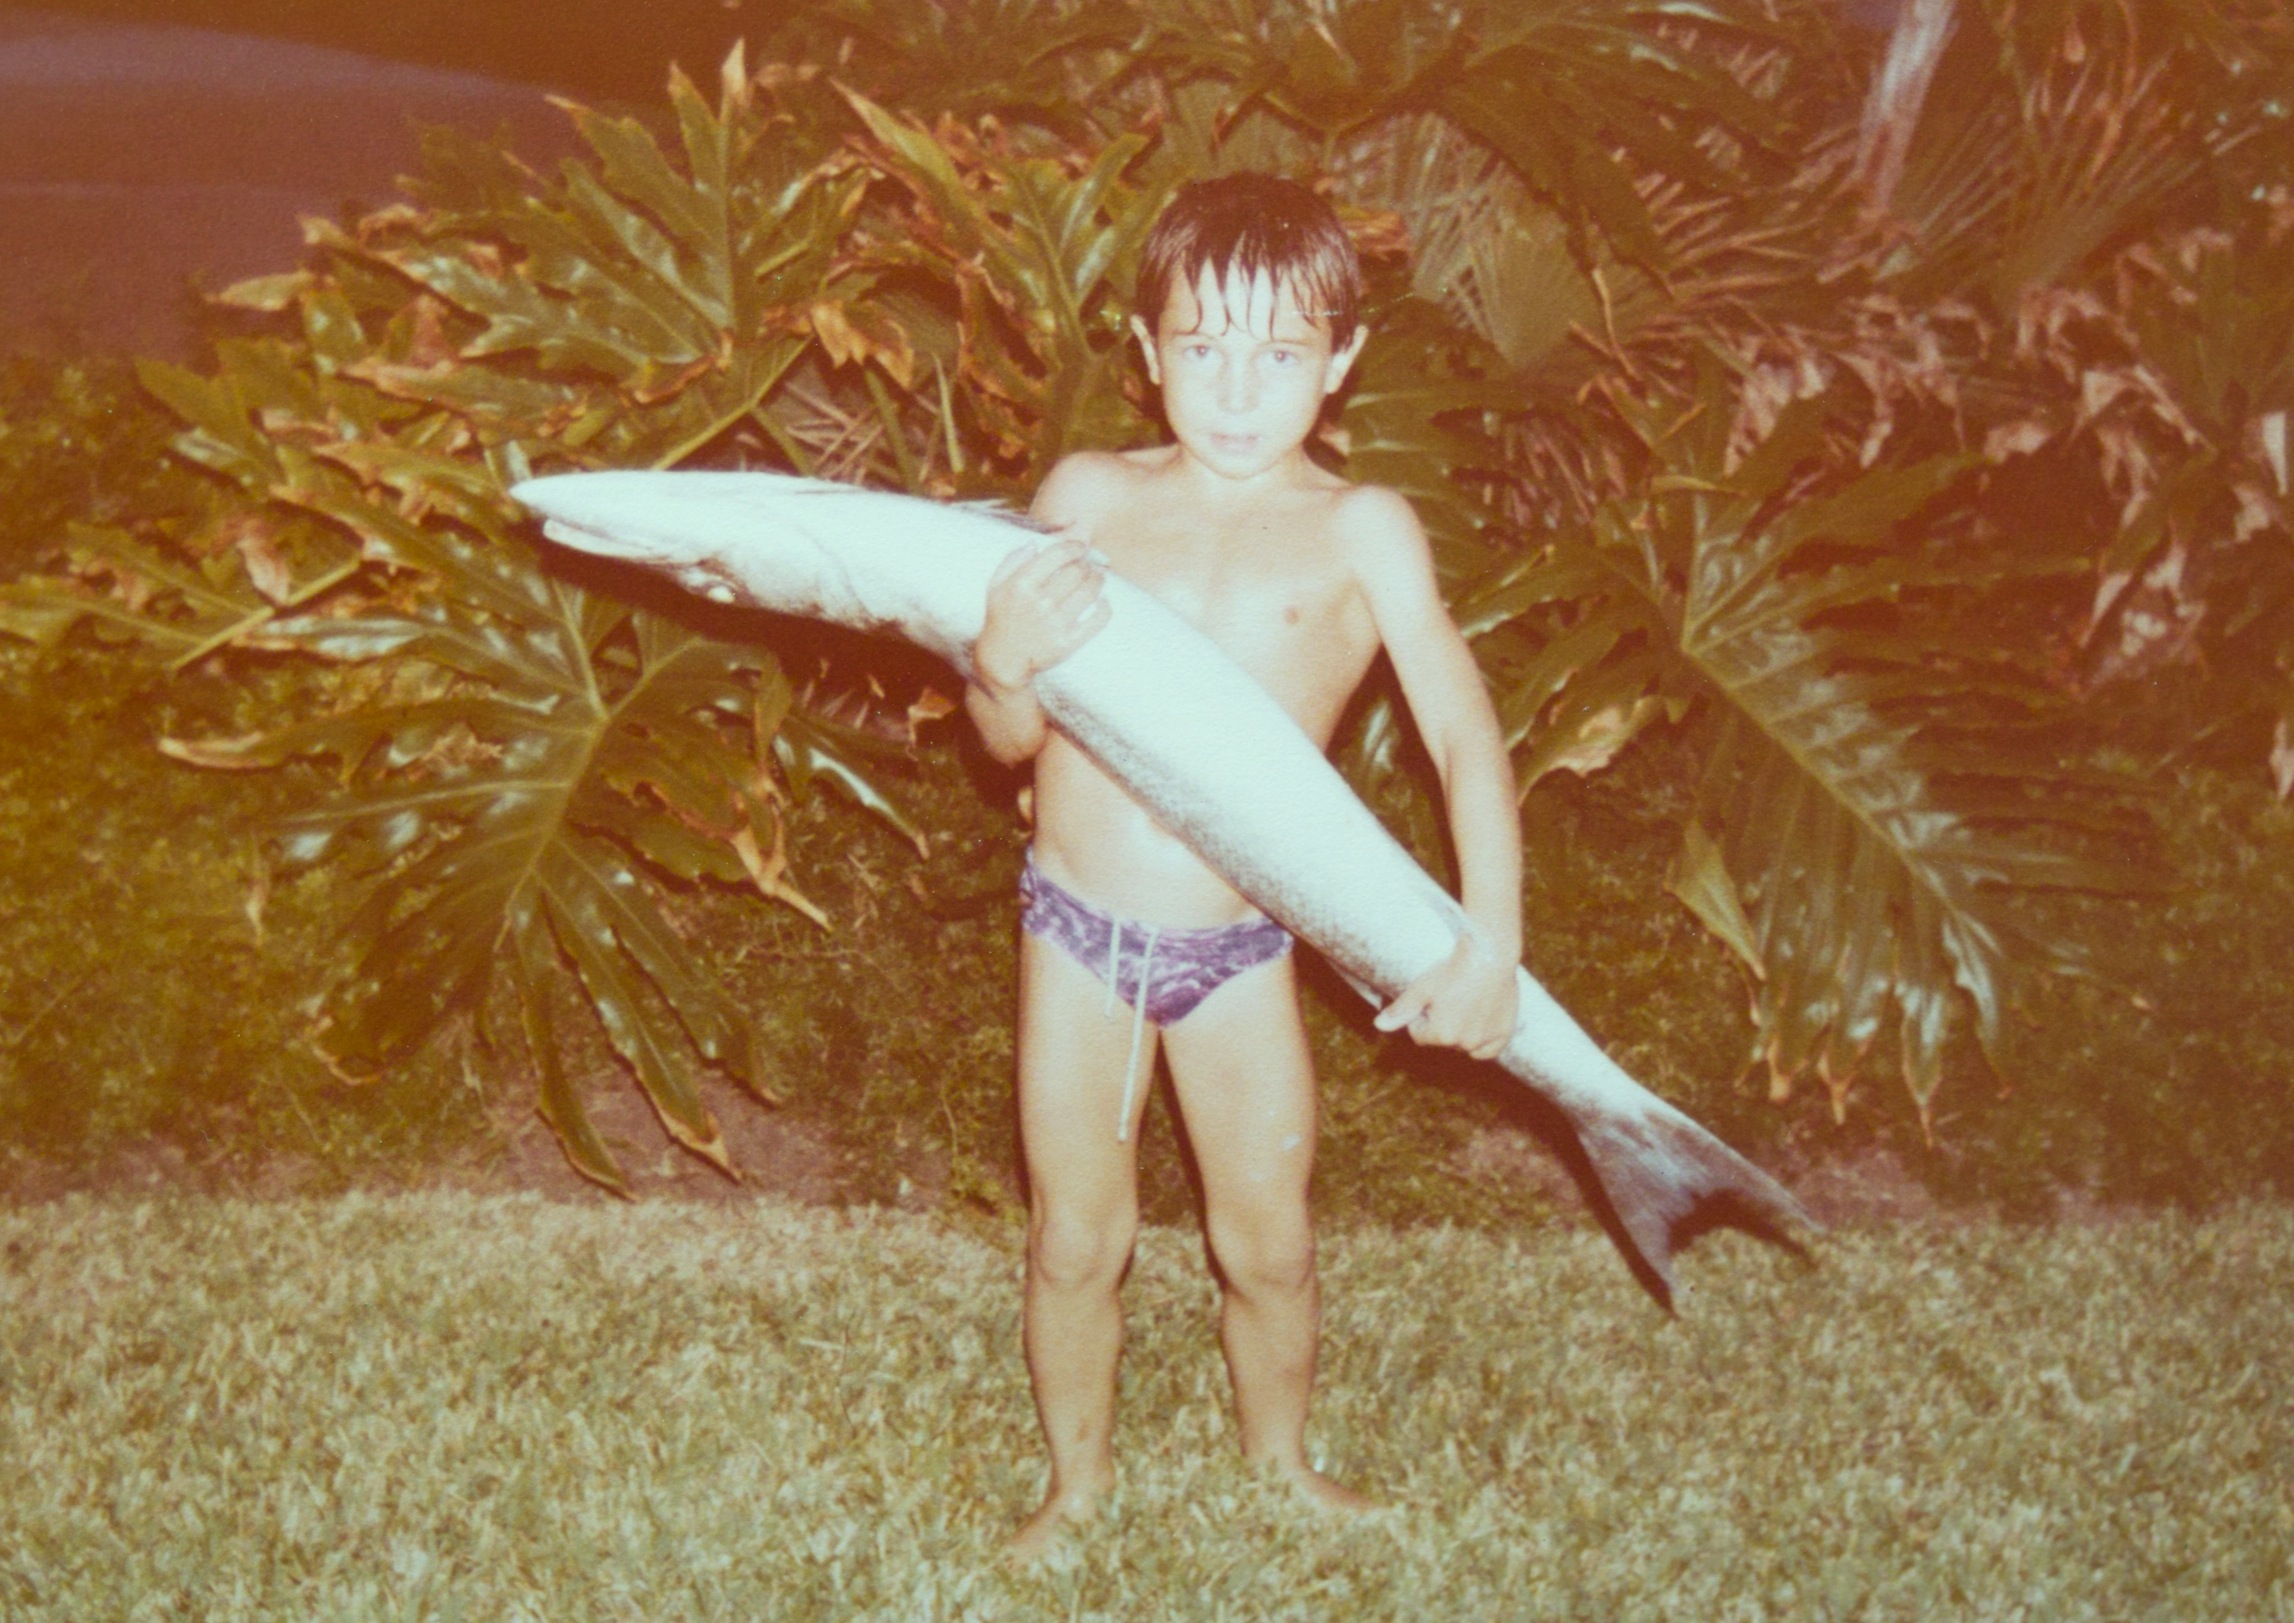 Me With The Barracuda That I Reeled In From The Beach A Long Time Ago.